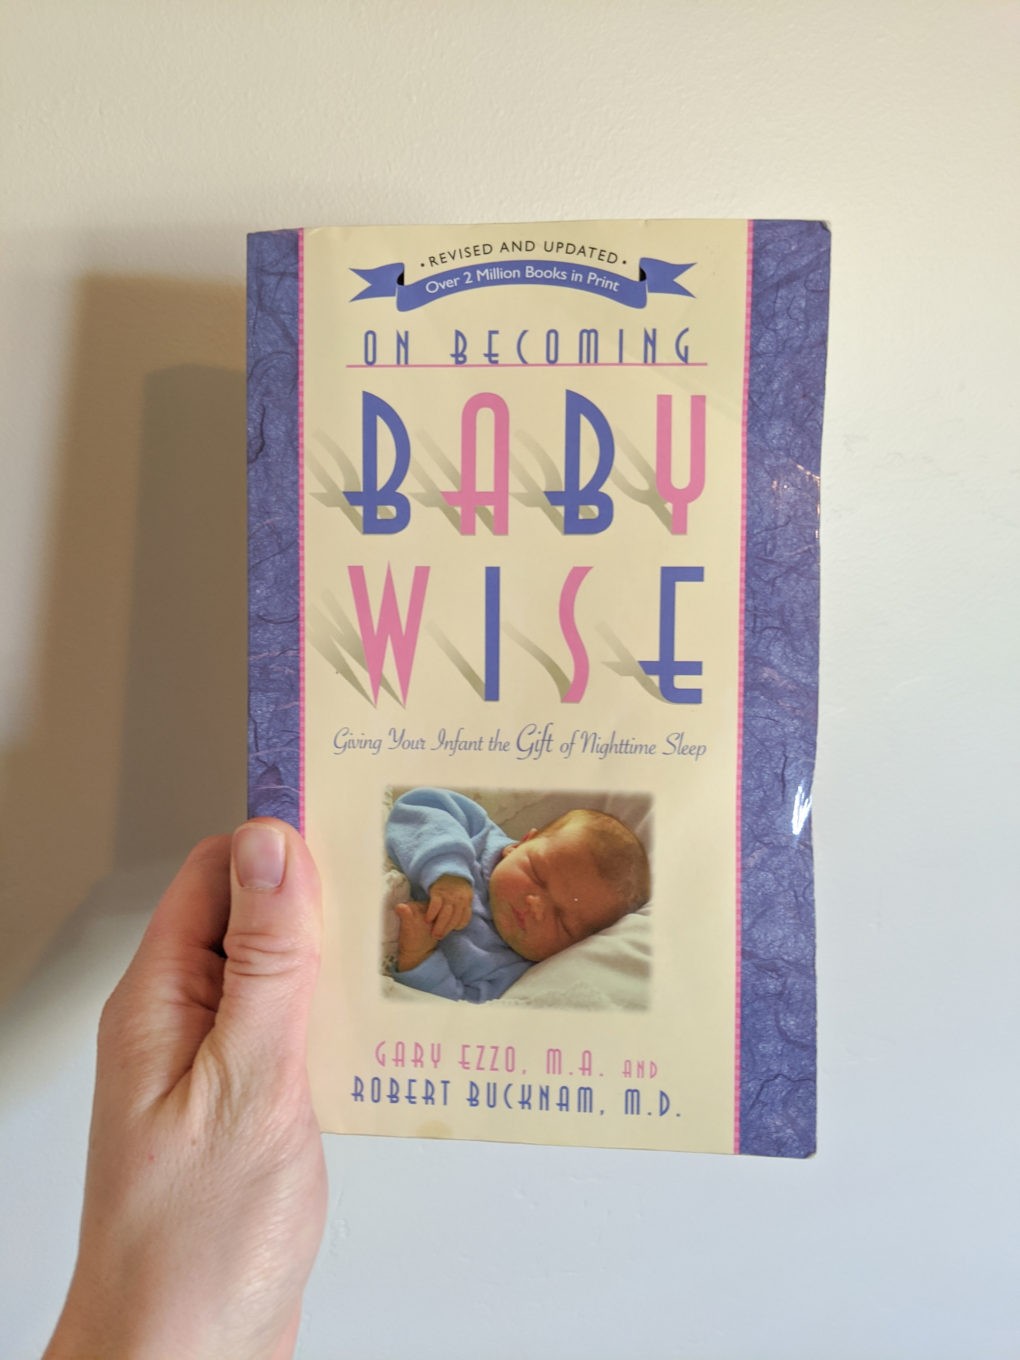 Babywise book for helping your baby sleep.